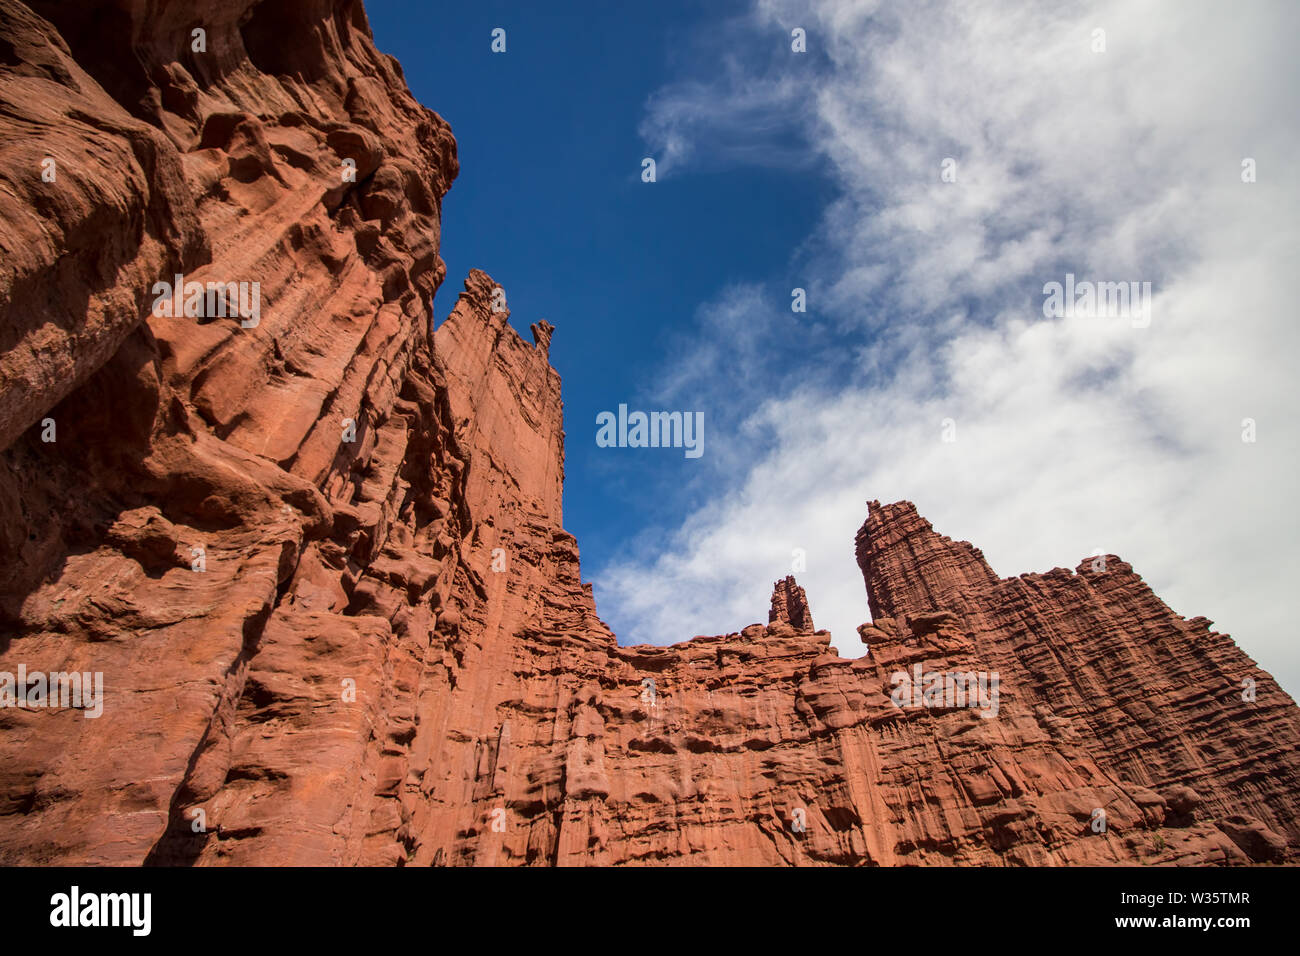 Looking up the red sandstone walls of the Fisher Towers in Utah. Stock Photo